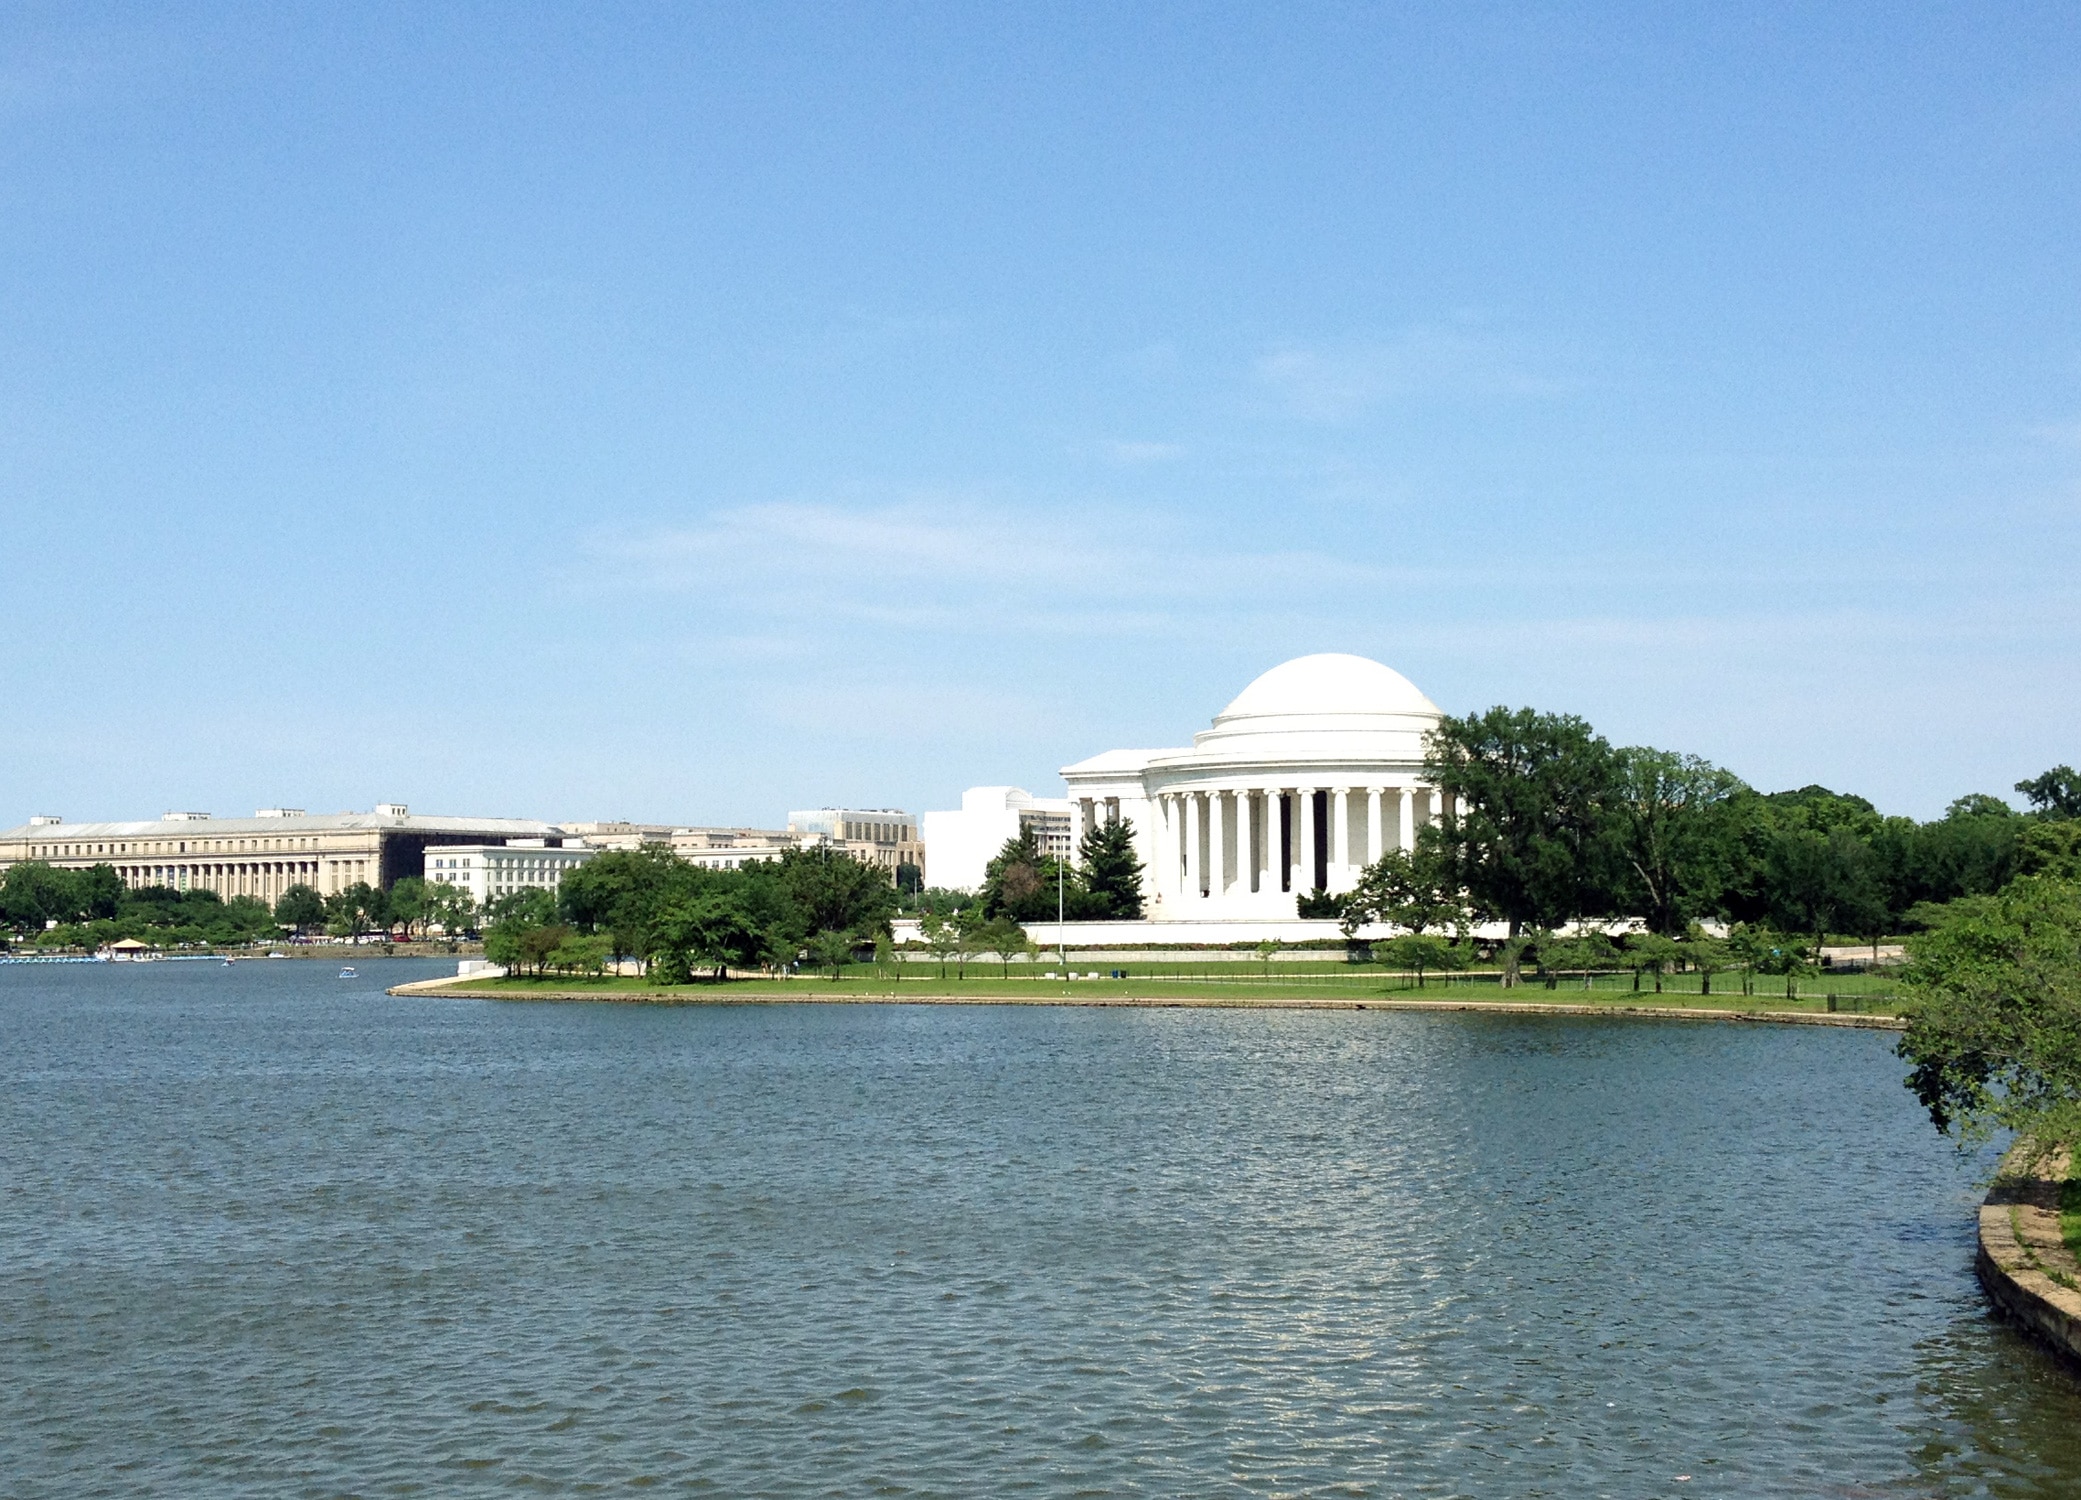 Design agency clients located in Washington DC, image showing The Capitol next to lake and trees.